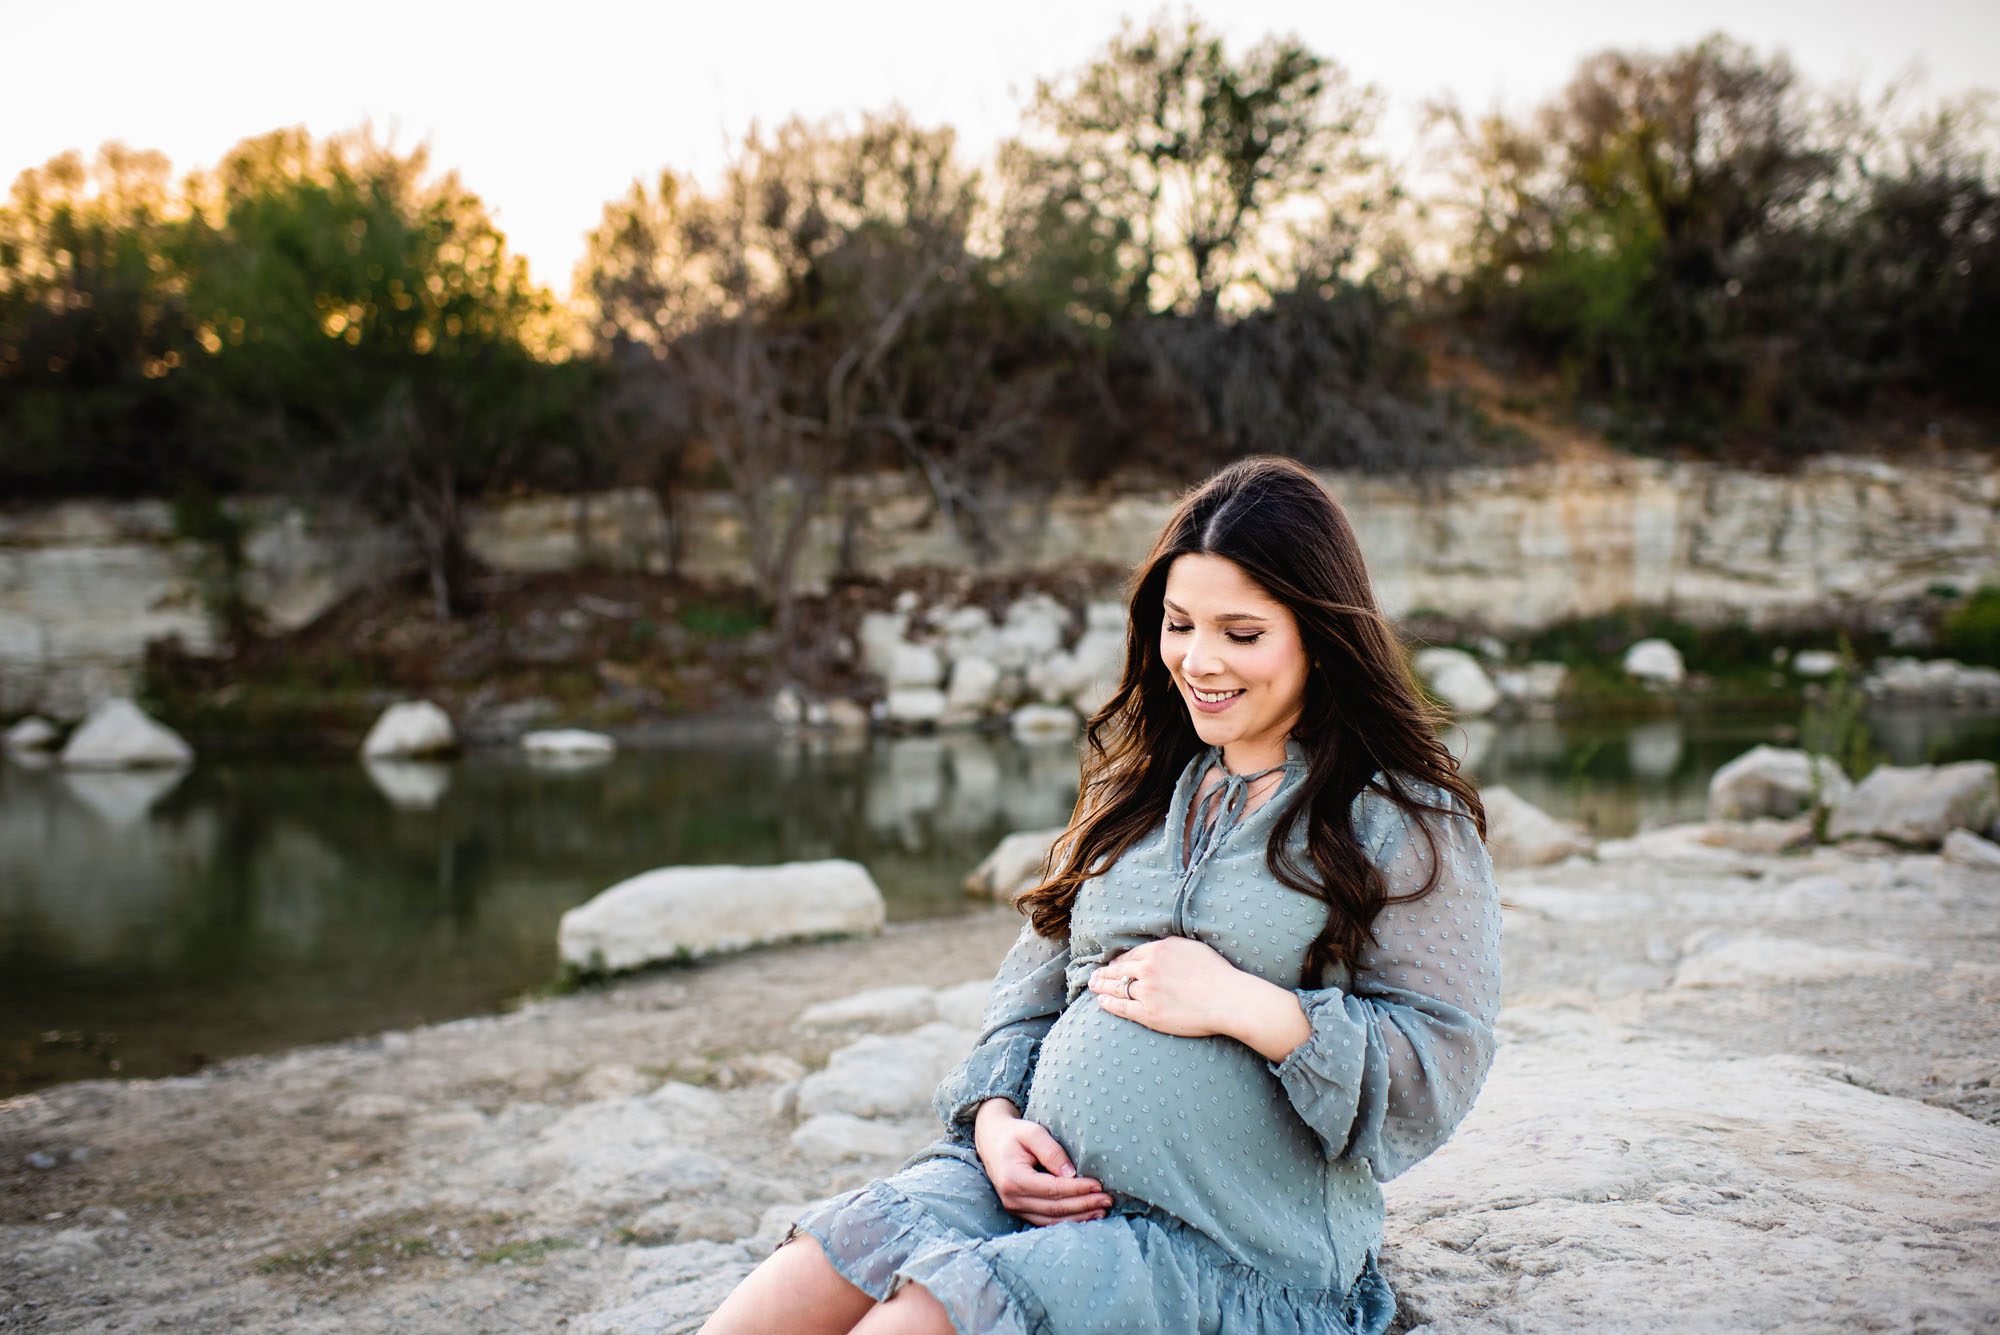 Mom smiling at her baby bump, Maternity photographer in San Antonio